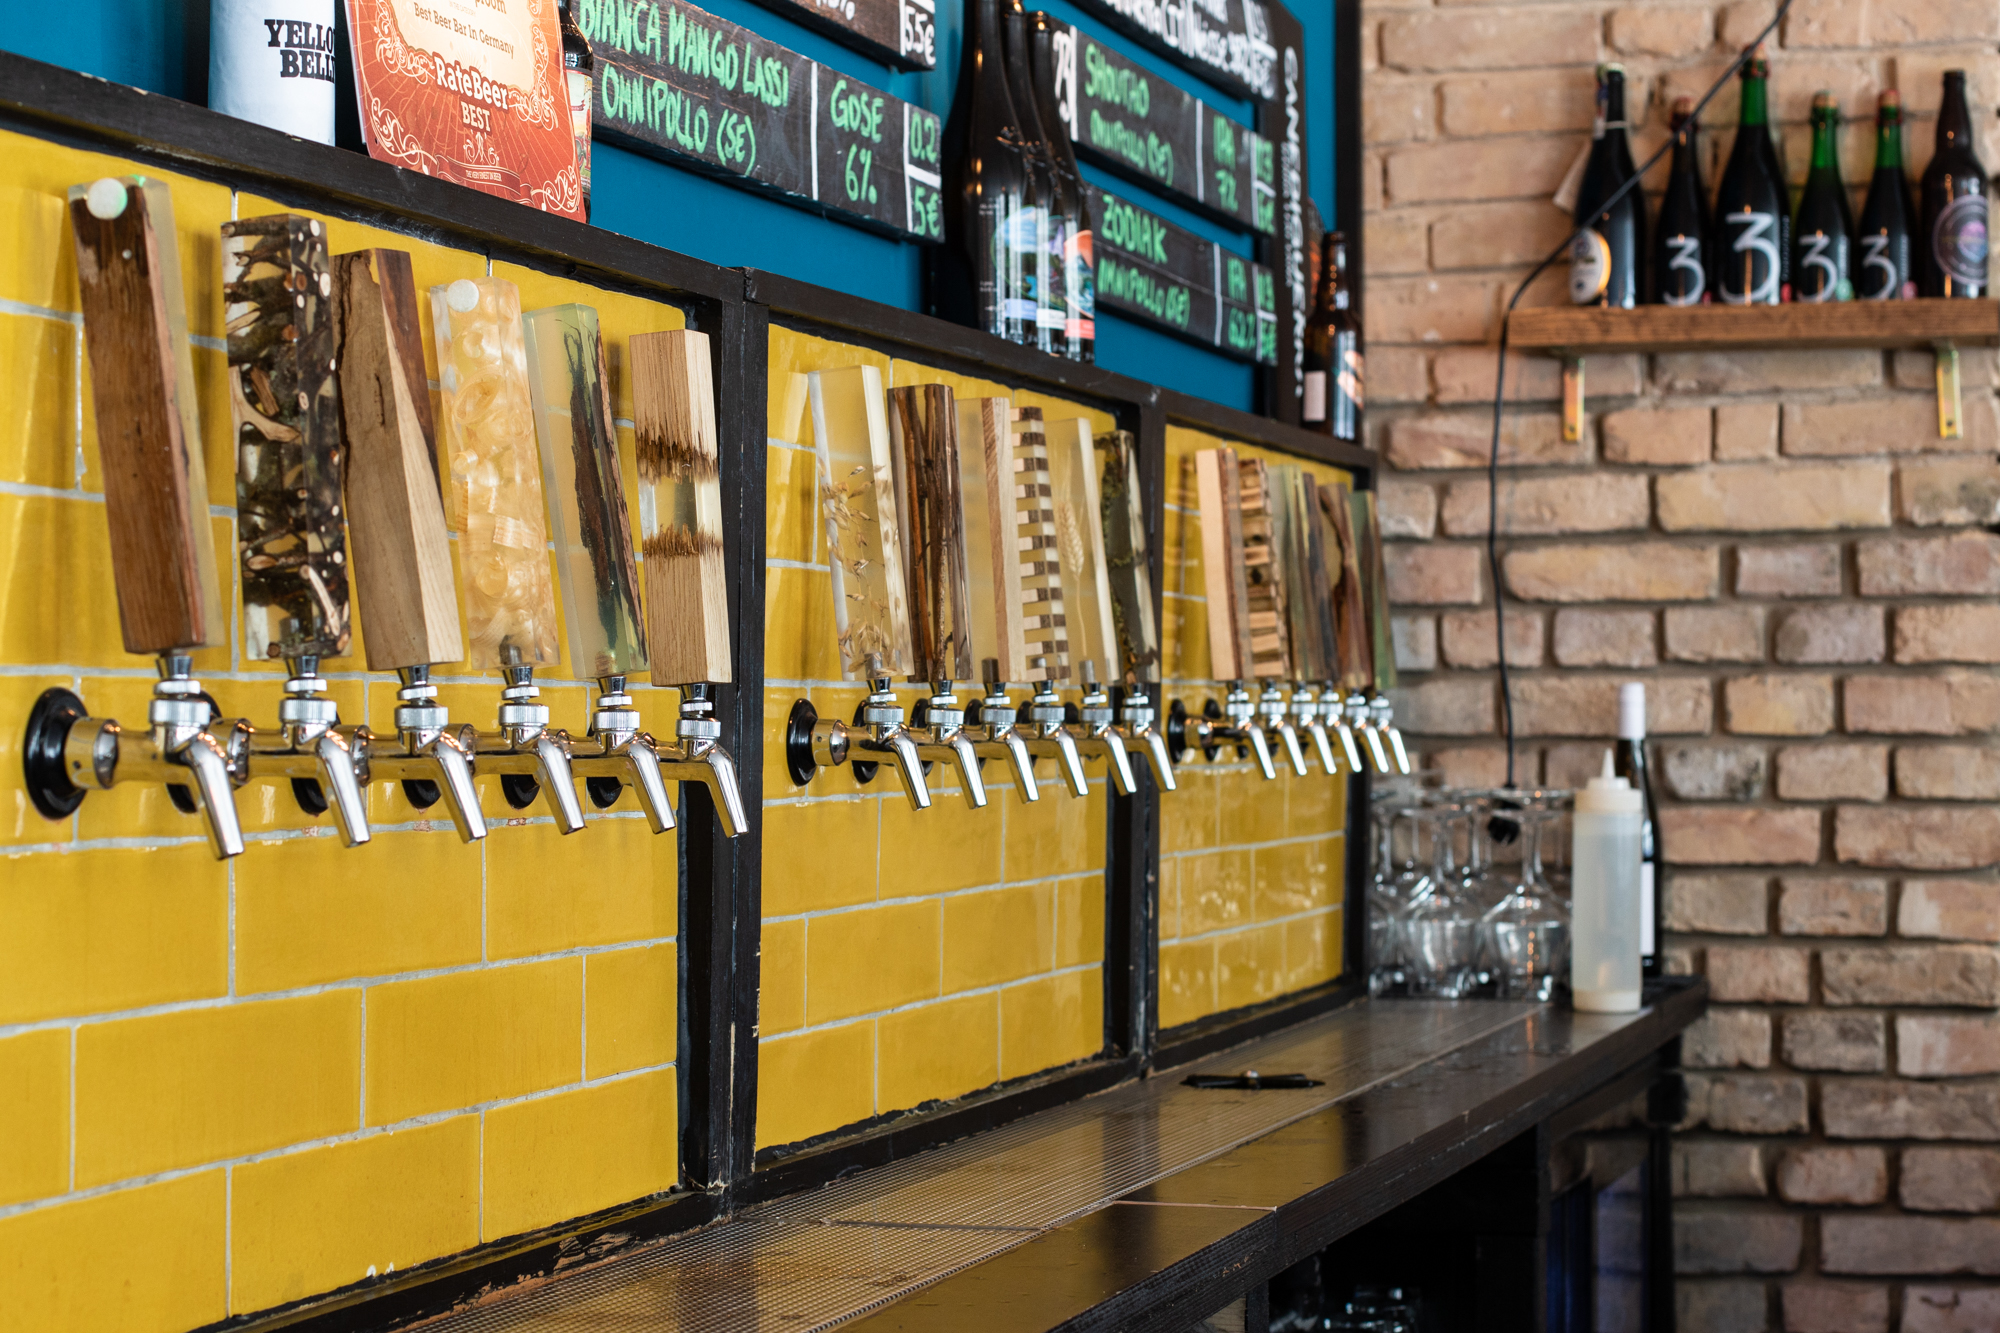 The taps and distinctive yellow tiles at Protokoll Taproom Berlin, a craft beer bar with 24 taps in Berlin Friedrichshain